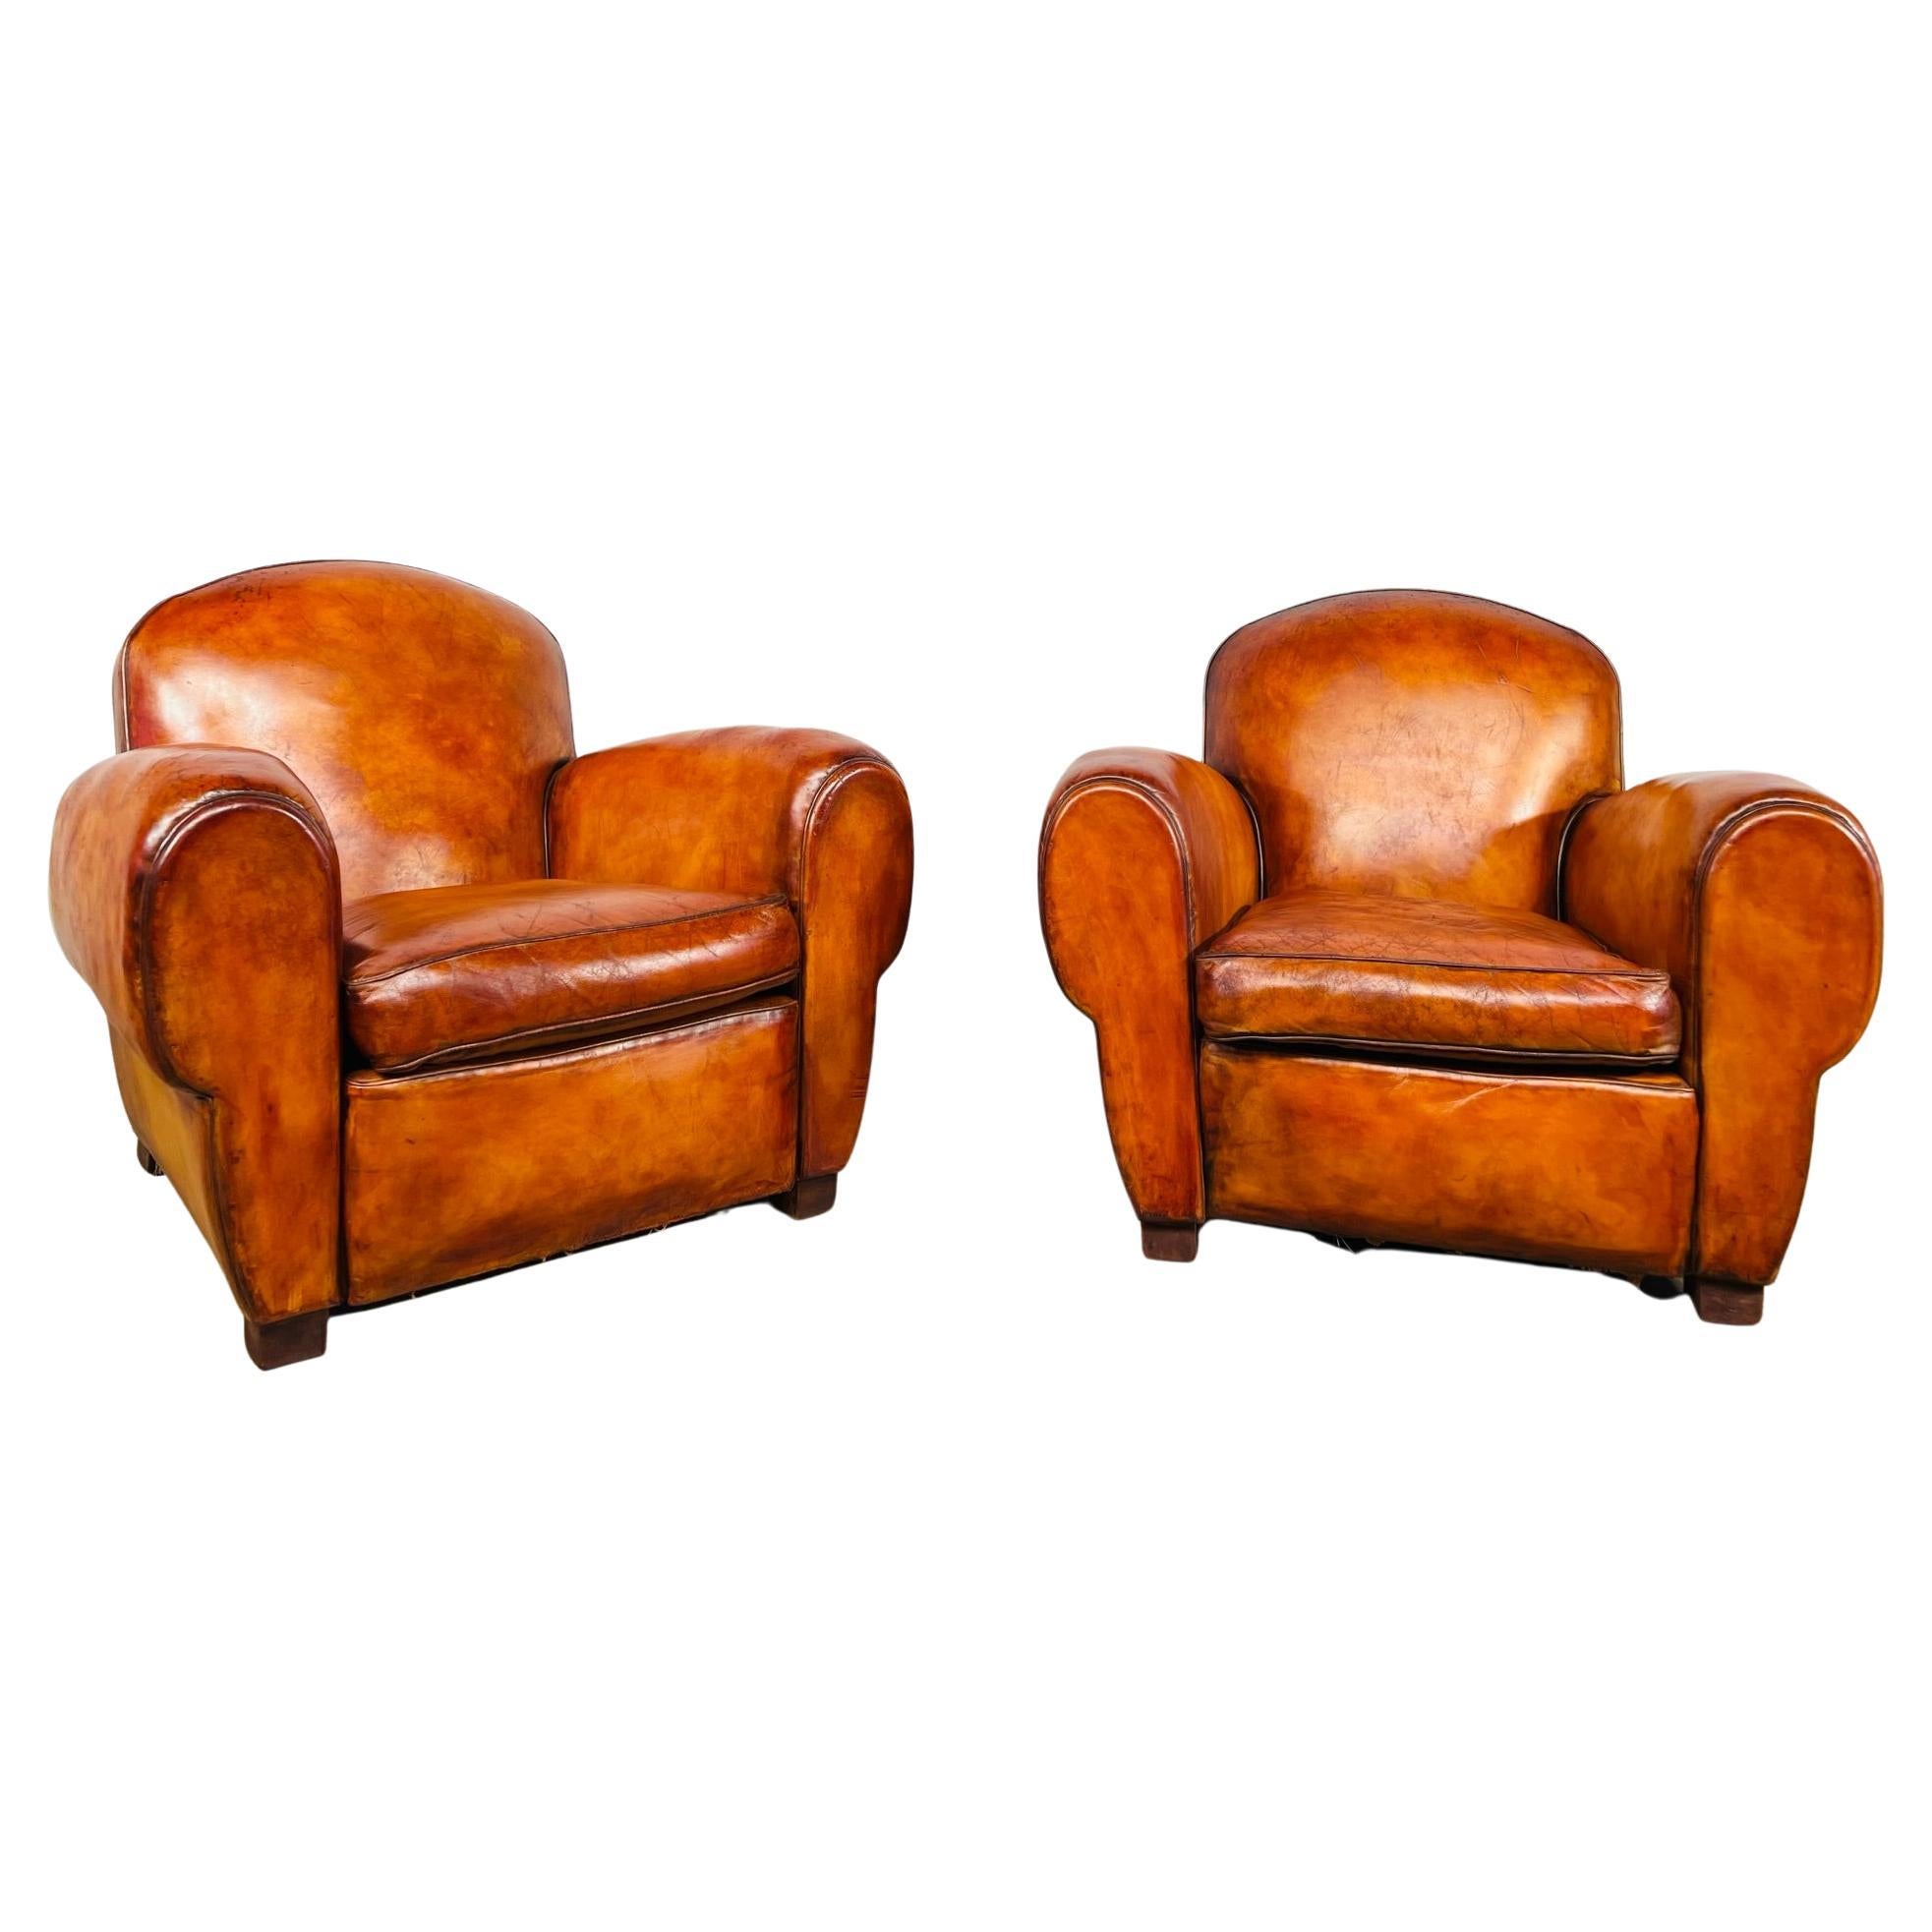 An exceptional pair of french club chairs, well sprung seats with long cigar shaped arms these chairs are comfortable to sit in.

They have a fantastic patinated cognac colour and the leather has a great Finish and patina, some superficial marks